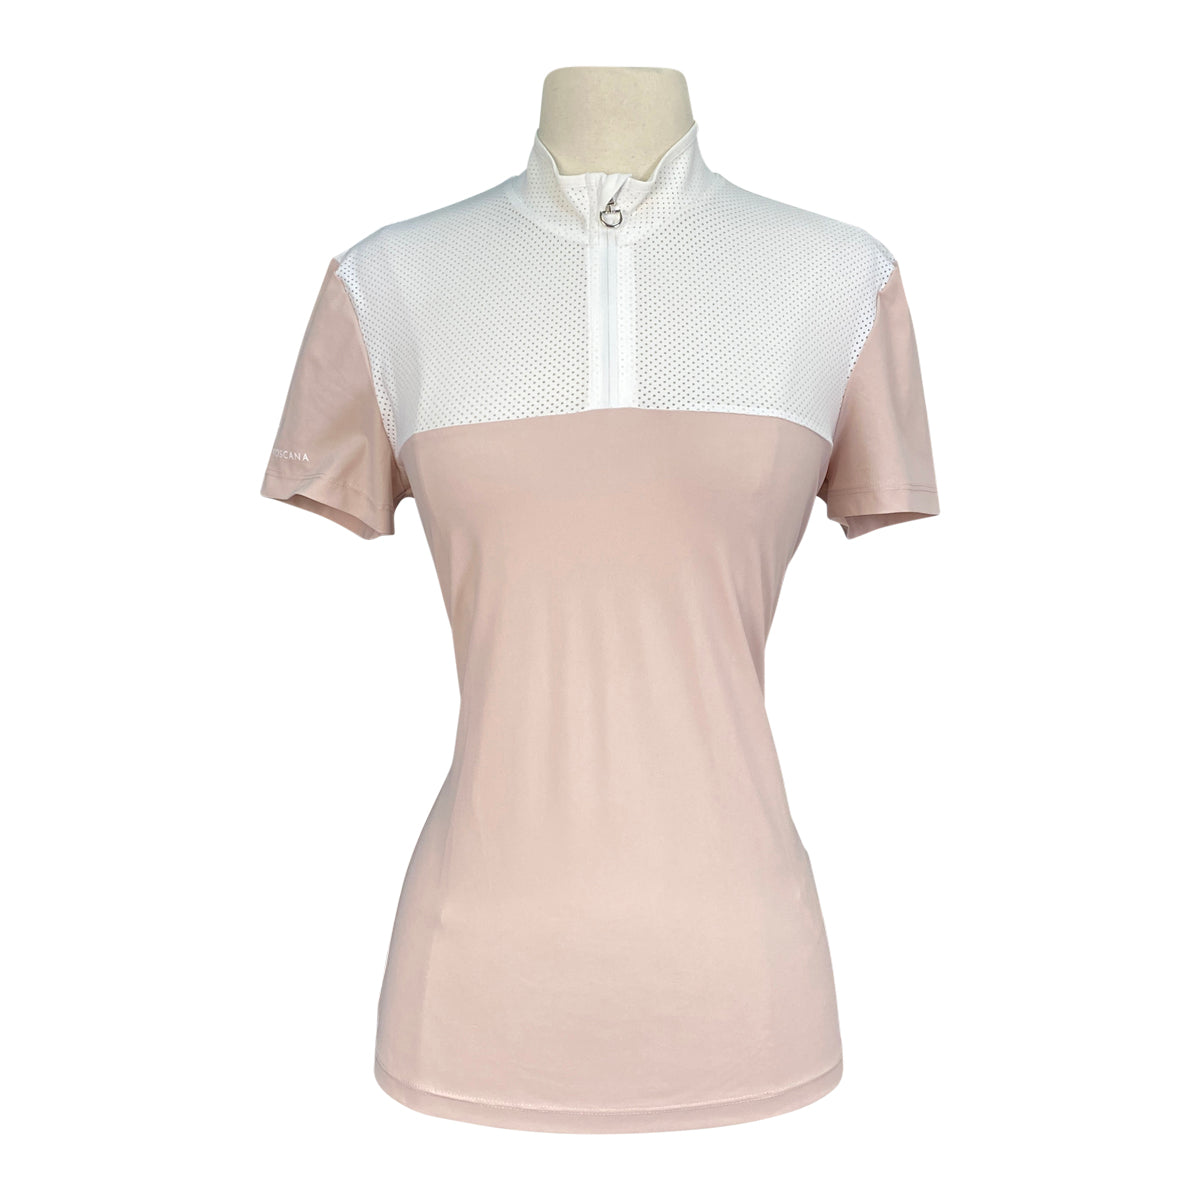 Cavalleria Toscana S/S Polo w/Perforated Bib in Pink